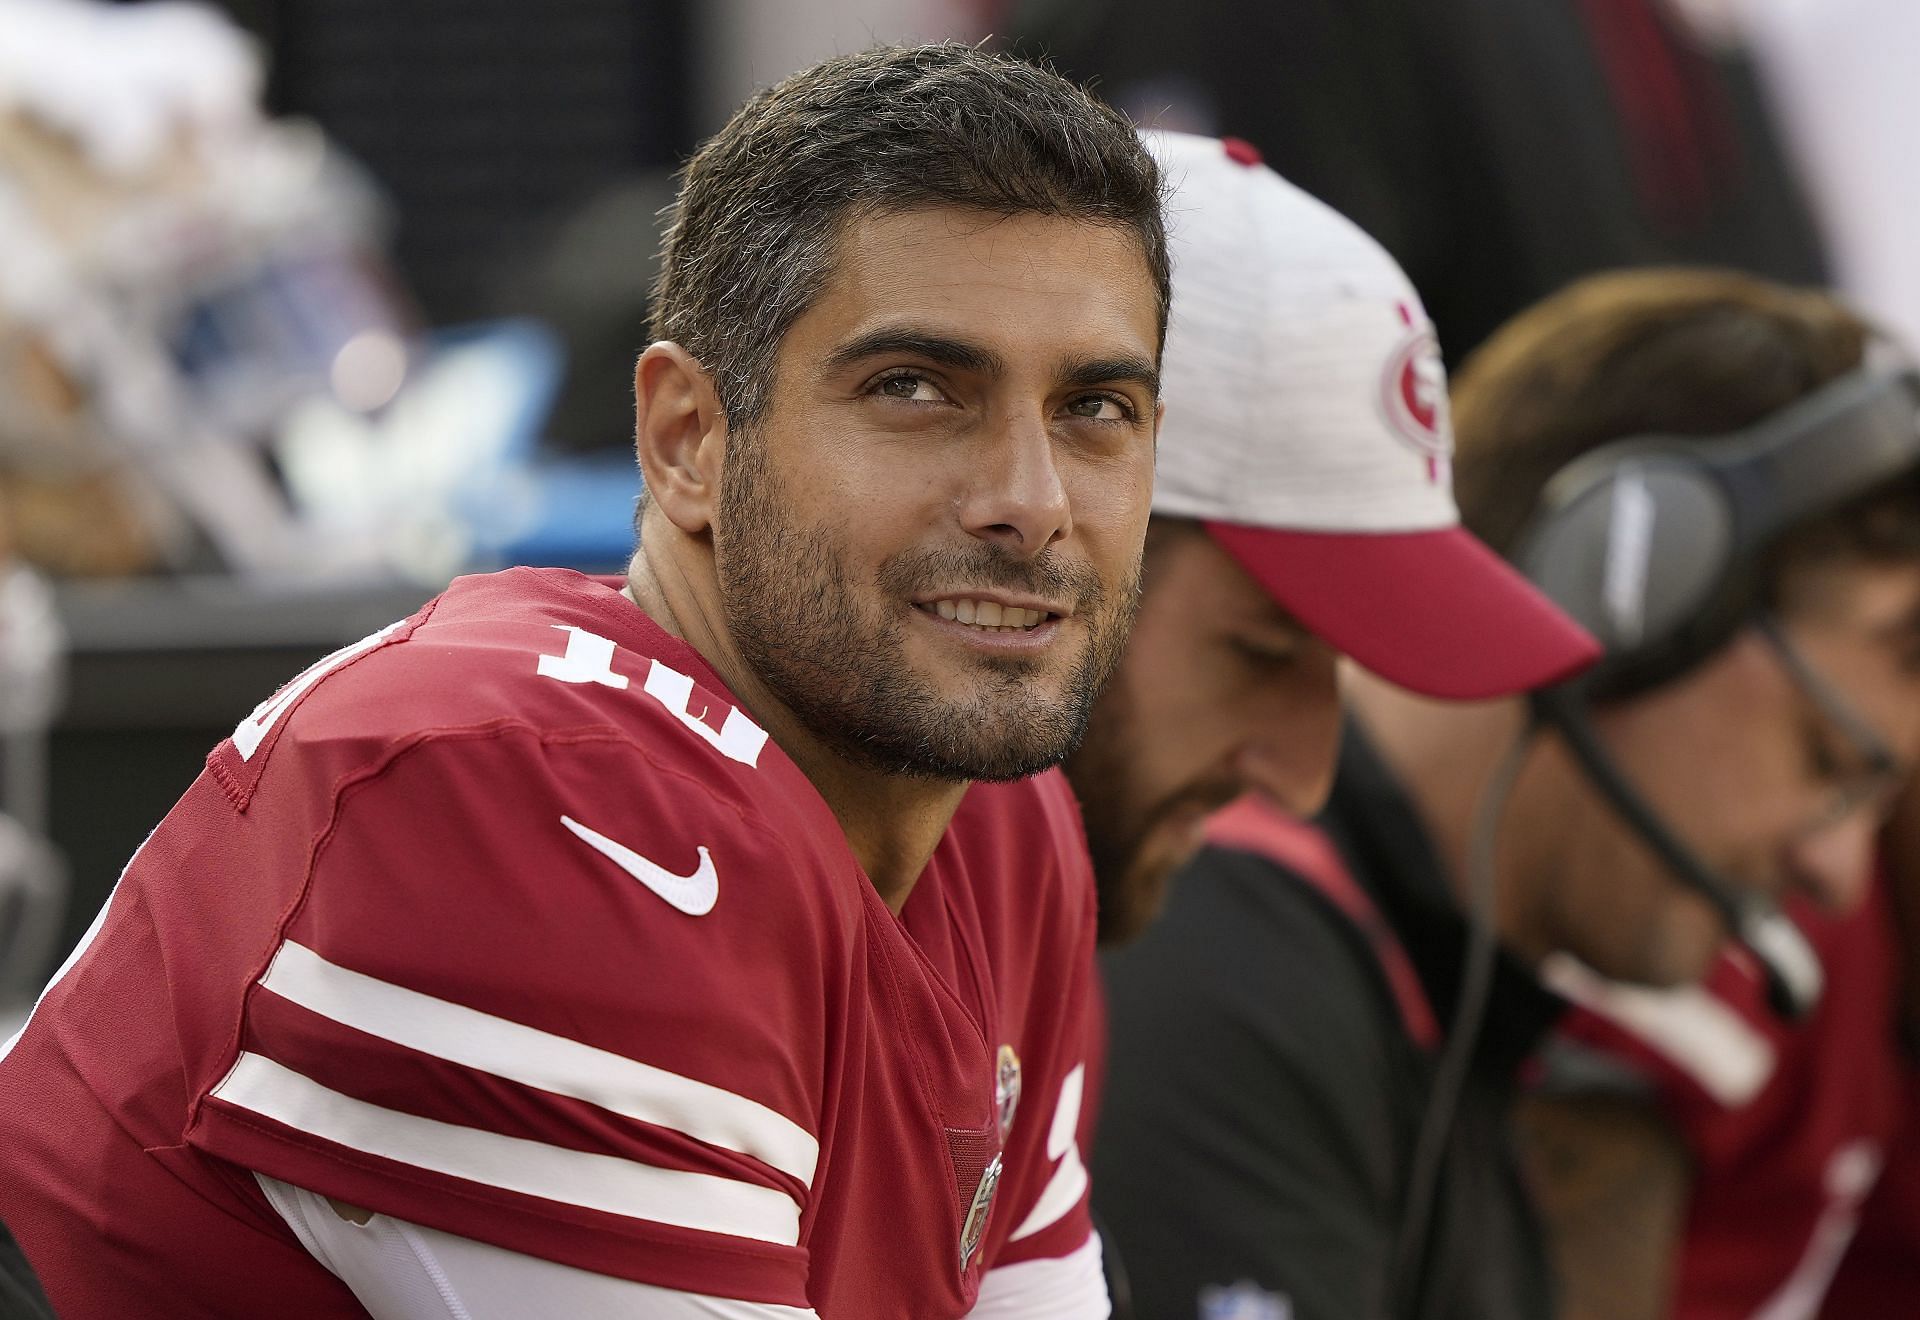 Jimmy Garoppolo is a logical fit for the New York Giants